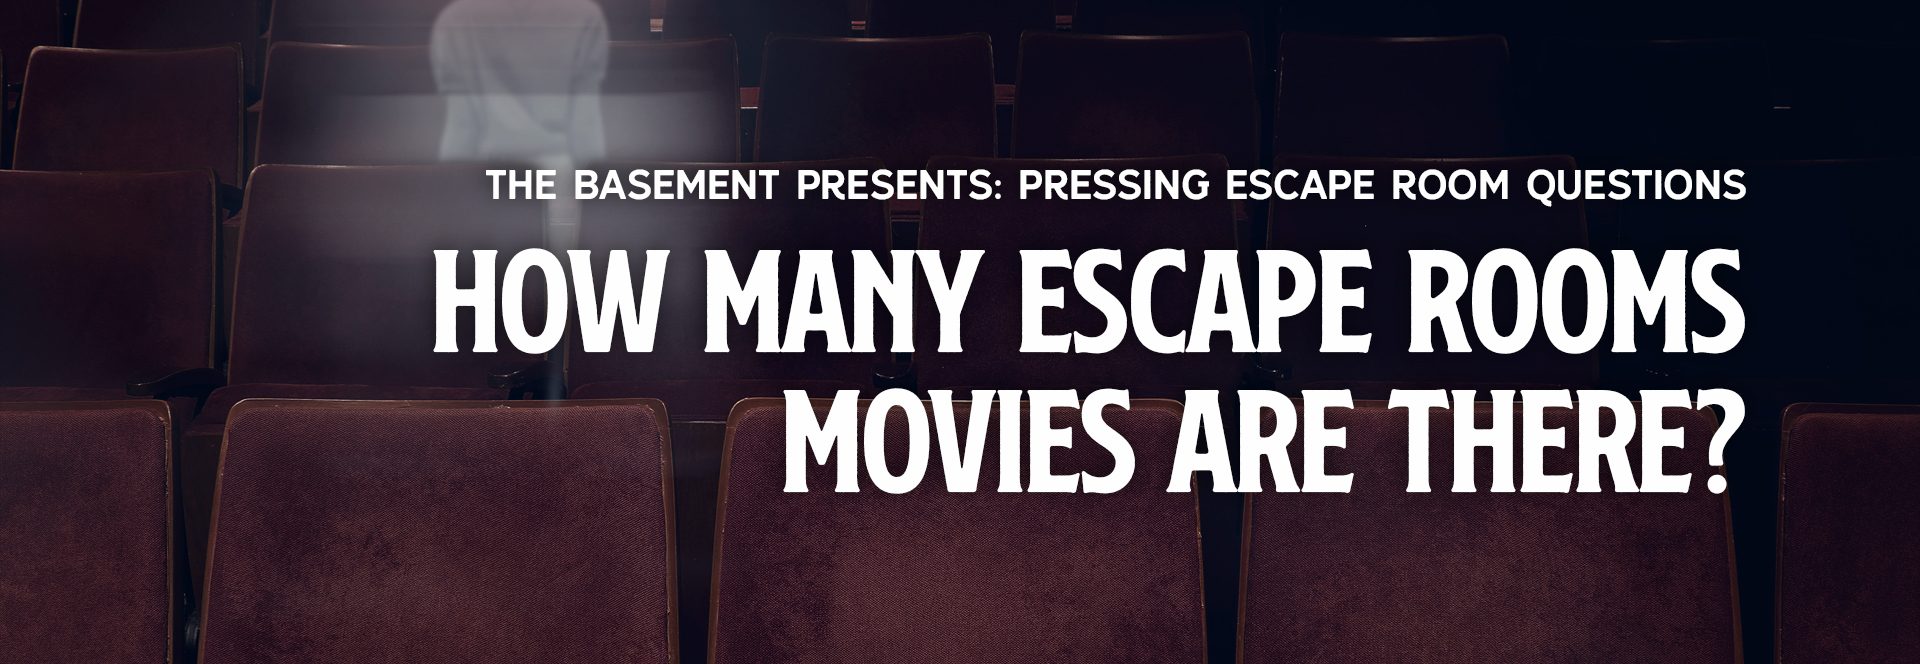 How Many Escape Rooms Movies Are There?